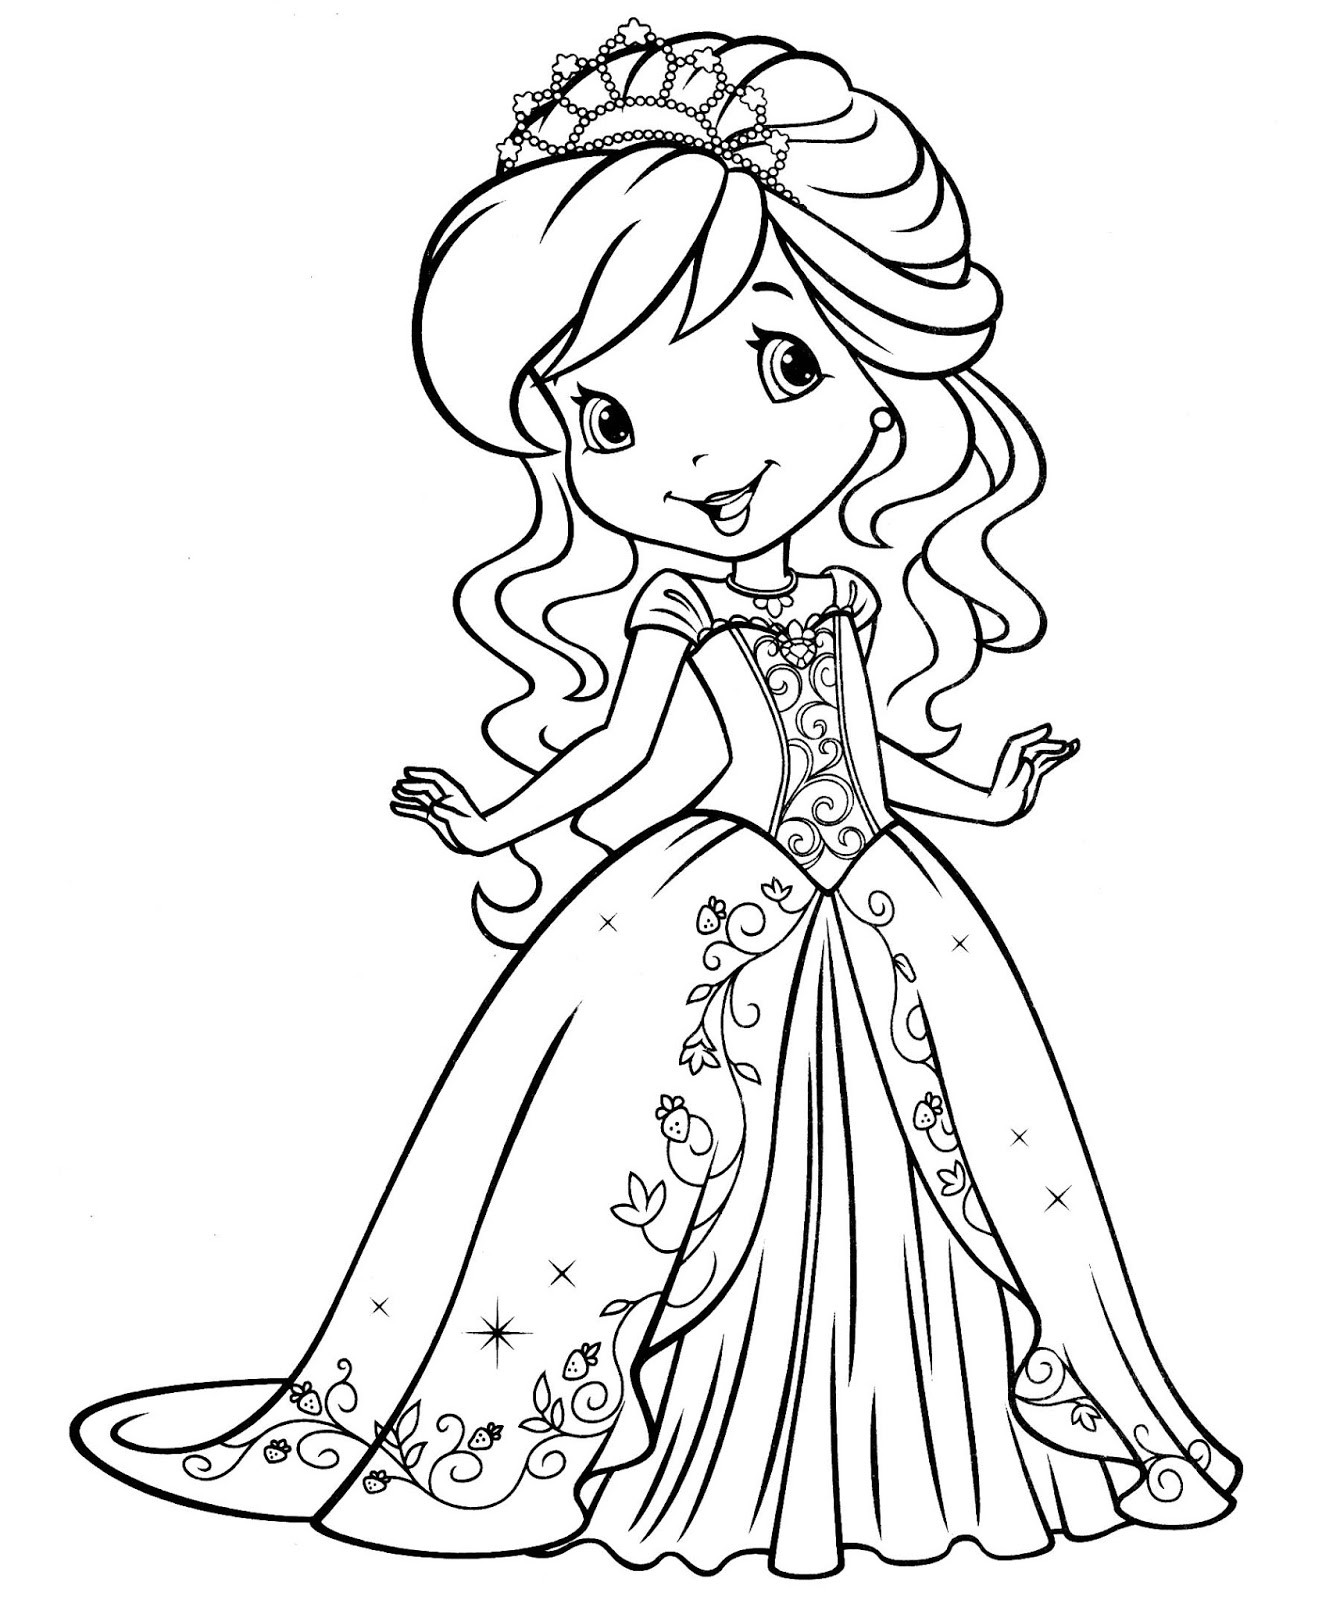 Printable Coloring Pages For Girls
 Coloring Pages for Girls Best Coloring Pages For Kids